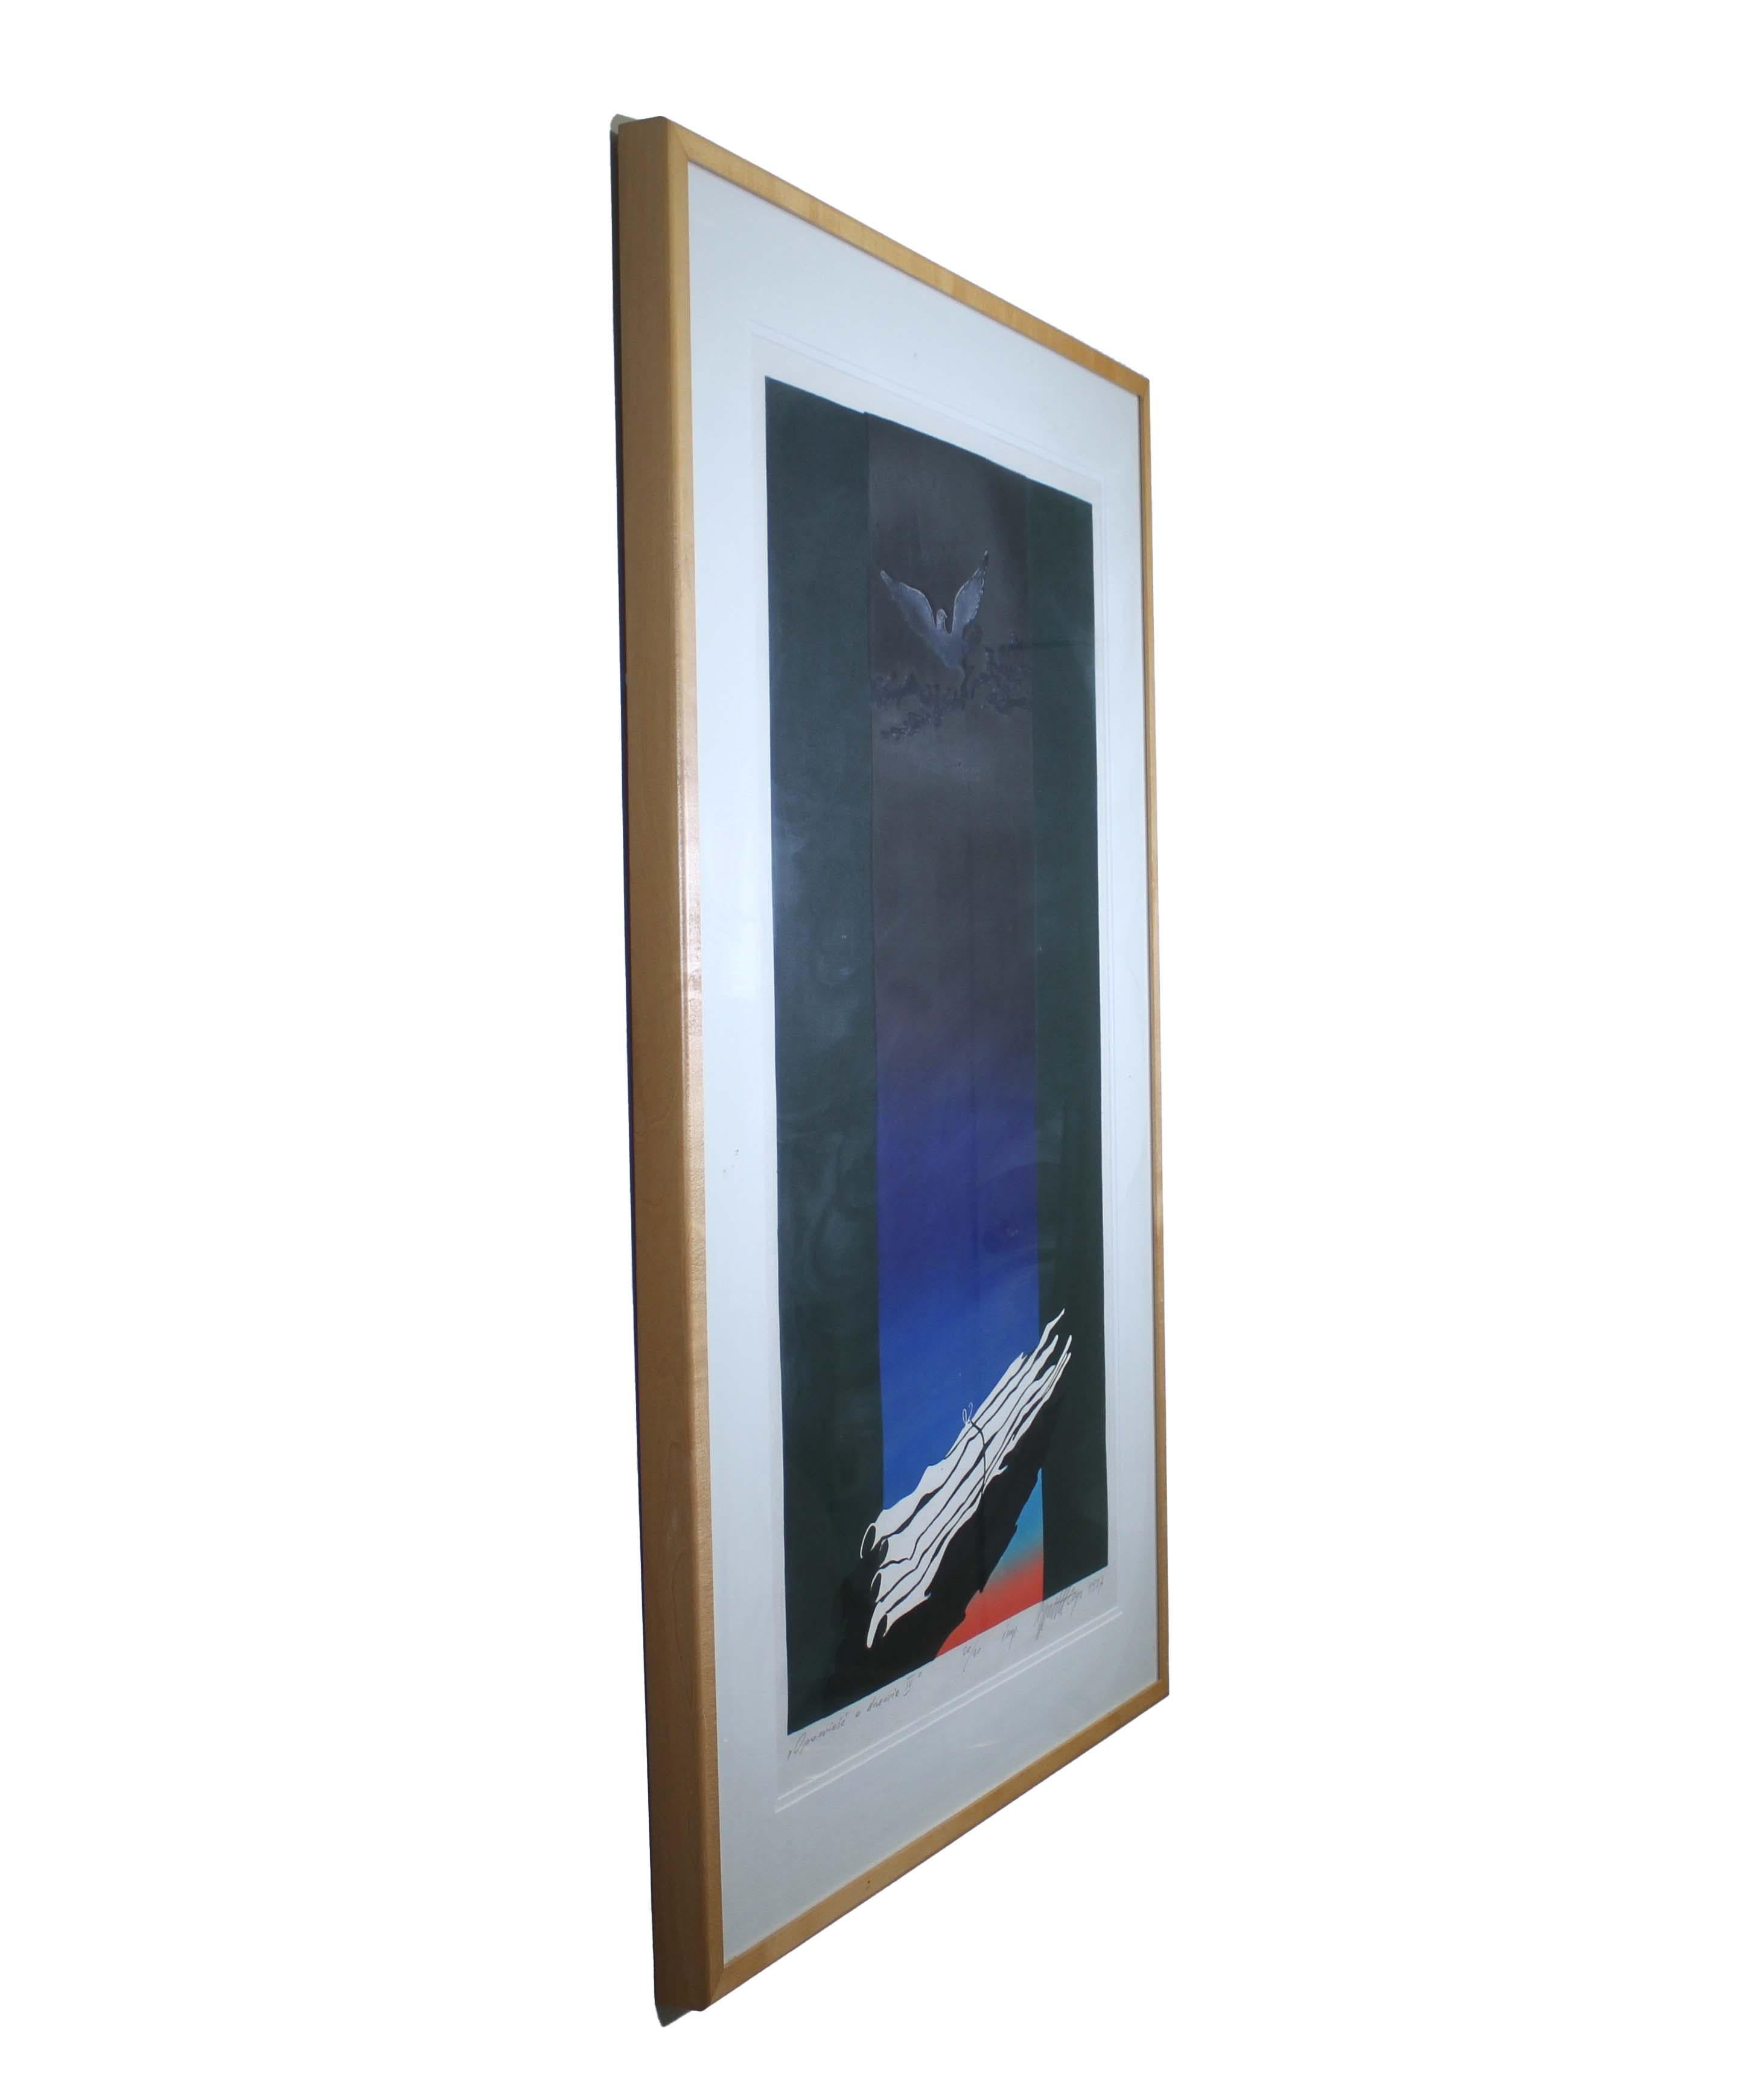 Zygmunt Czyz Surrealist Soaring Dove Signed Linocut on Paper 20/30 Framed, 1987 In Good Condition For Sale In Keego Harbor, MI